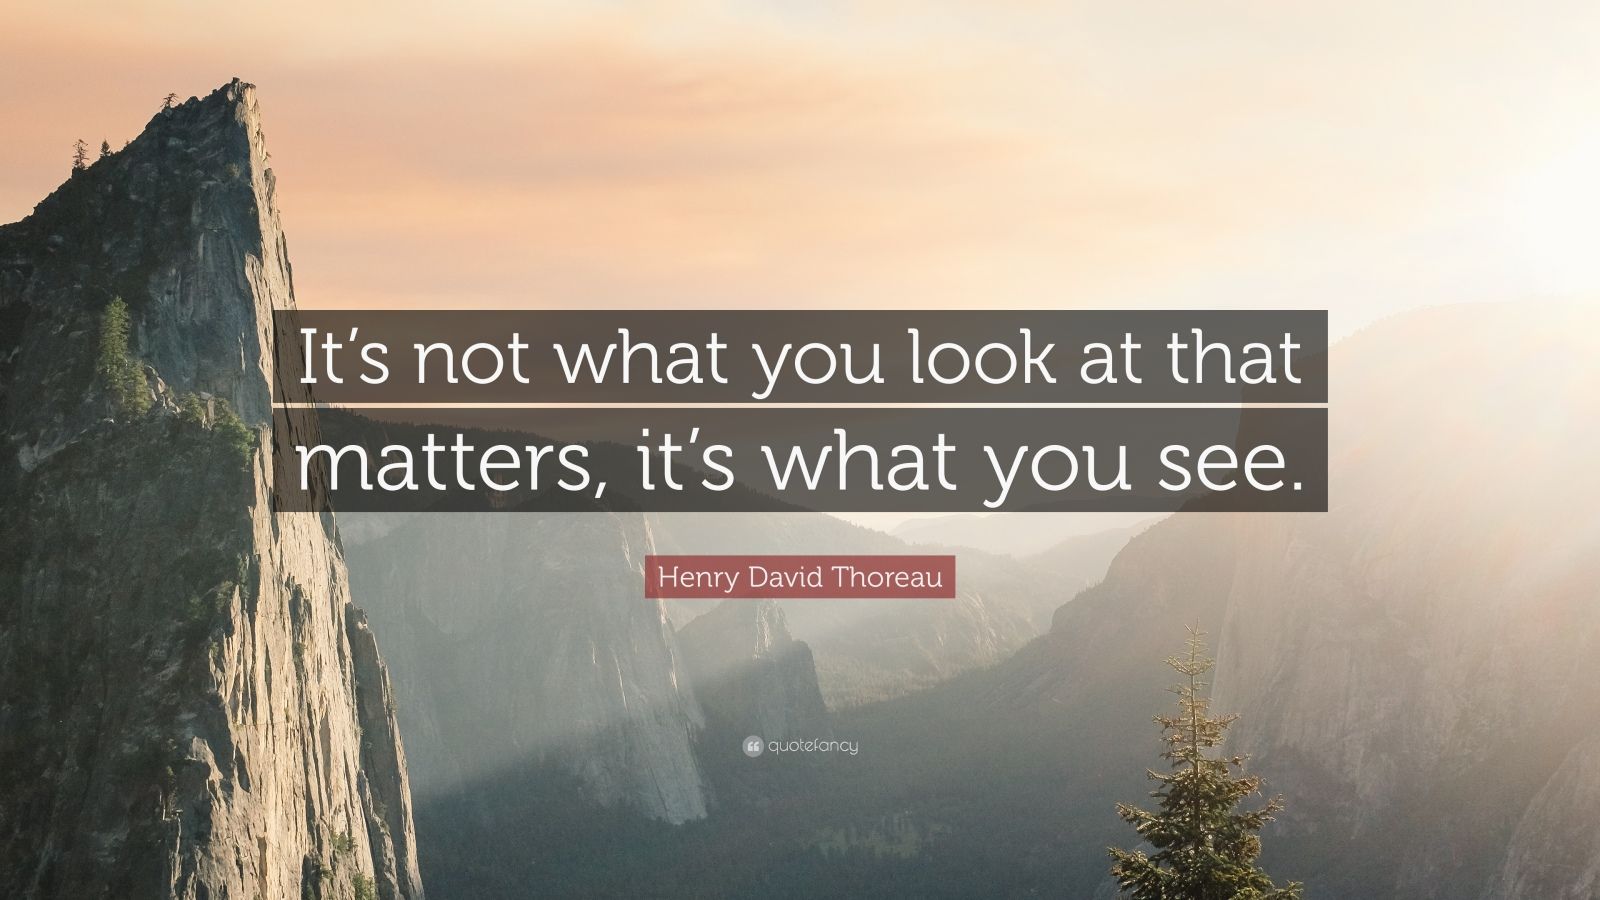 Henry David Thoreau Quote: “It’s not what you look at that matters, it